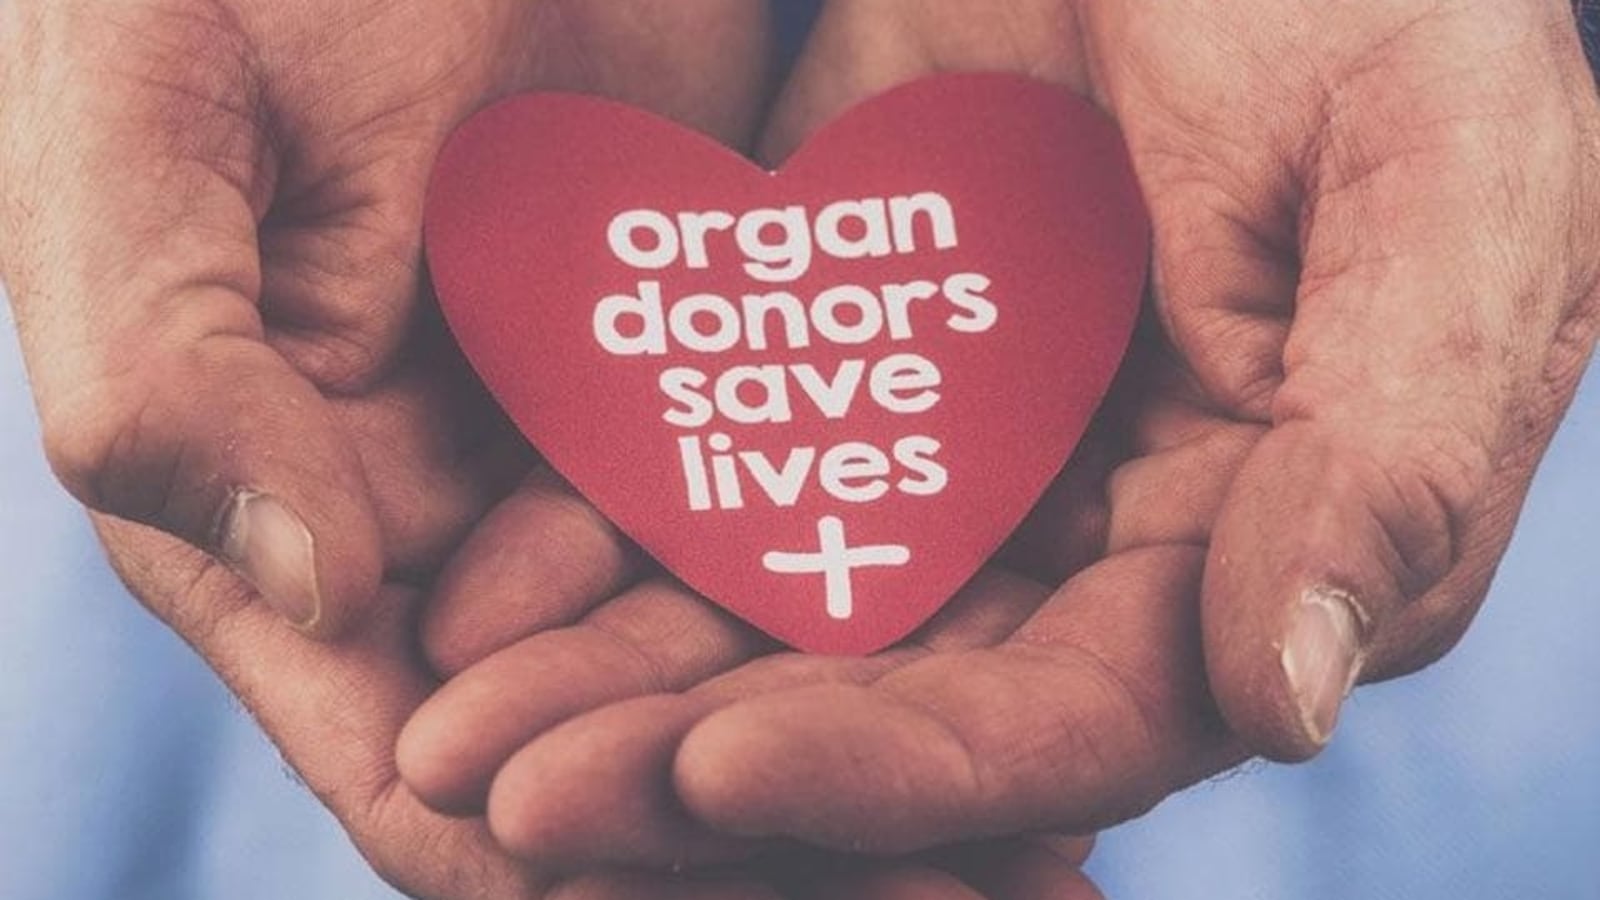 essay on organ donation a step towards serving humanity